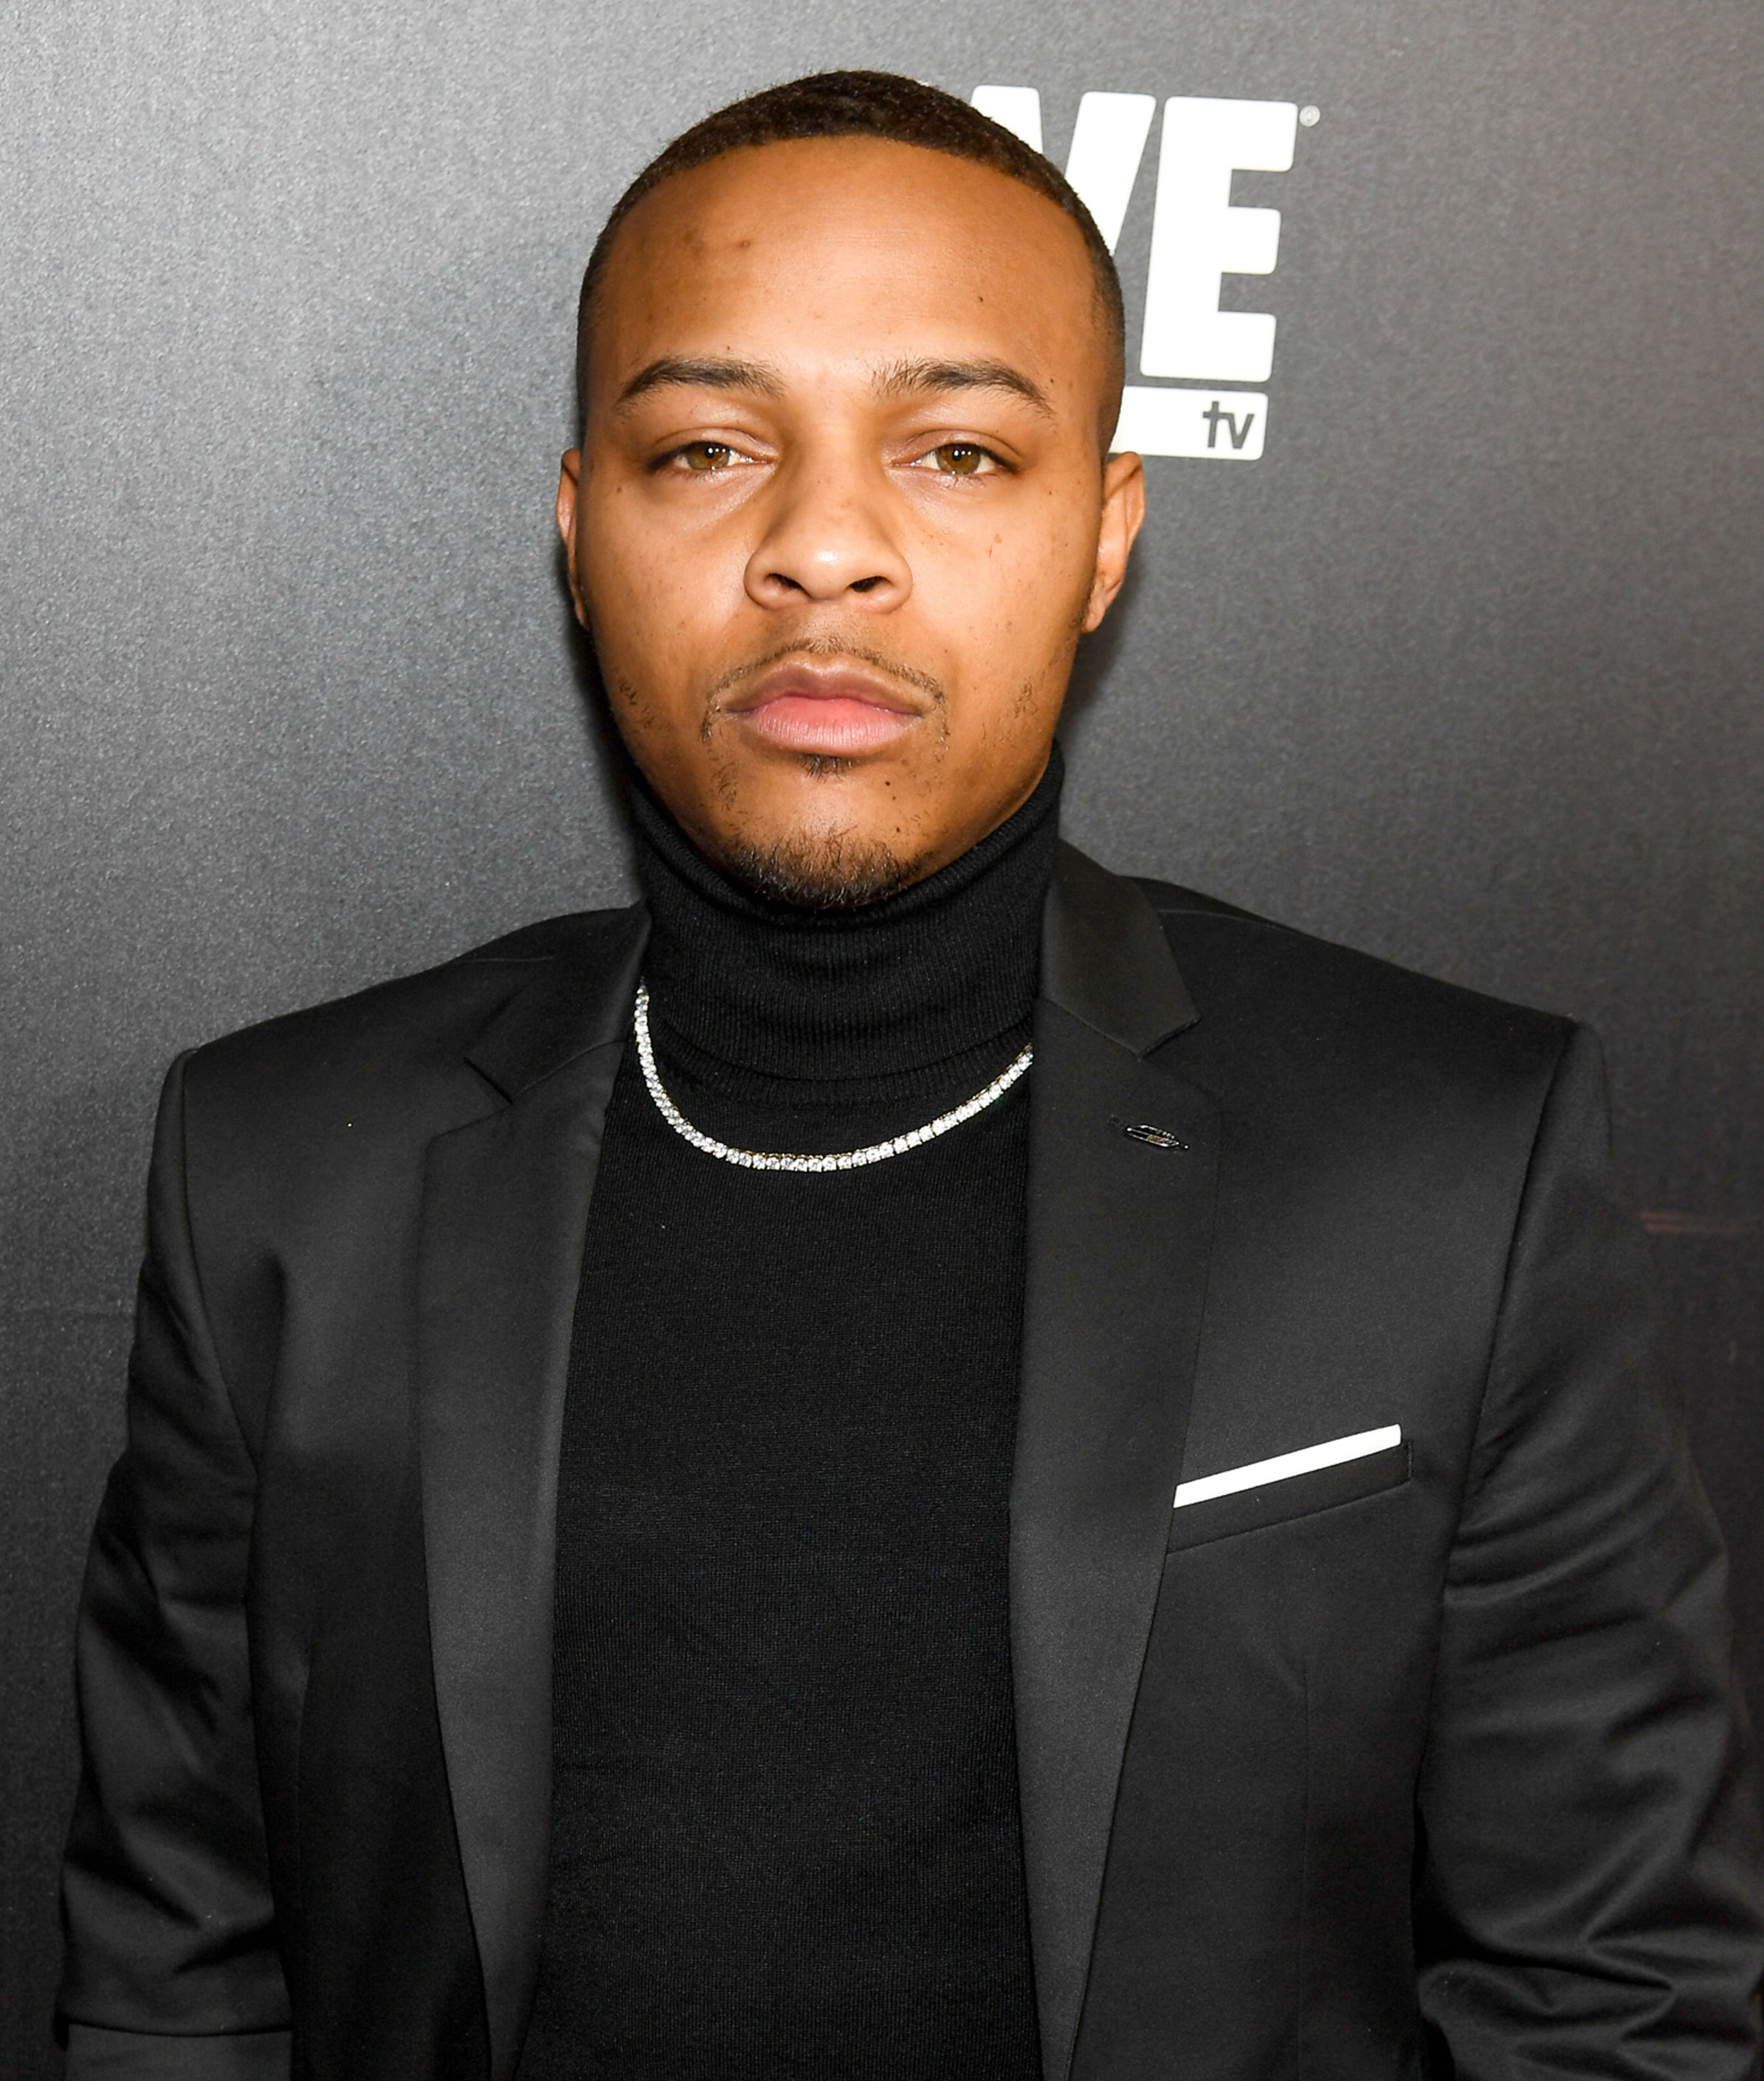 How tall is Bow Wow?